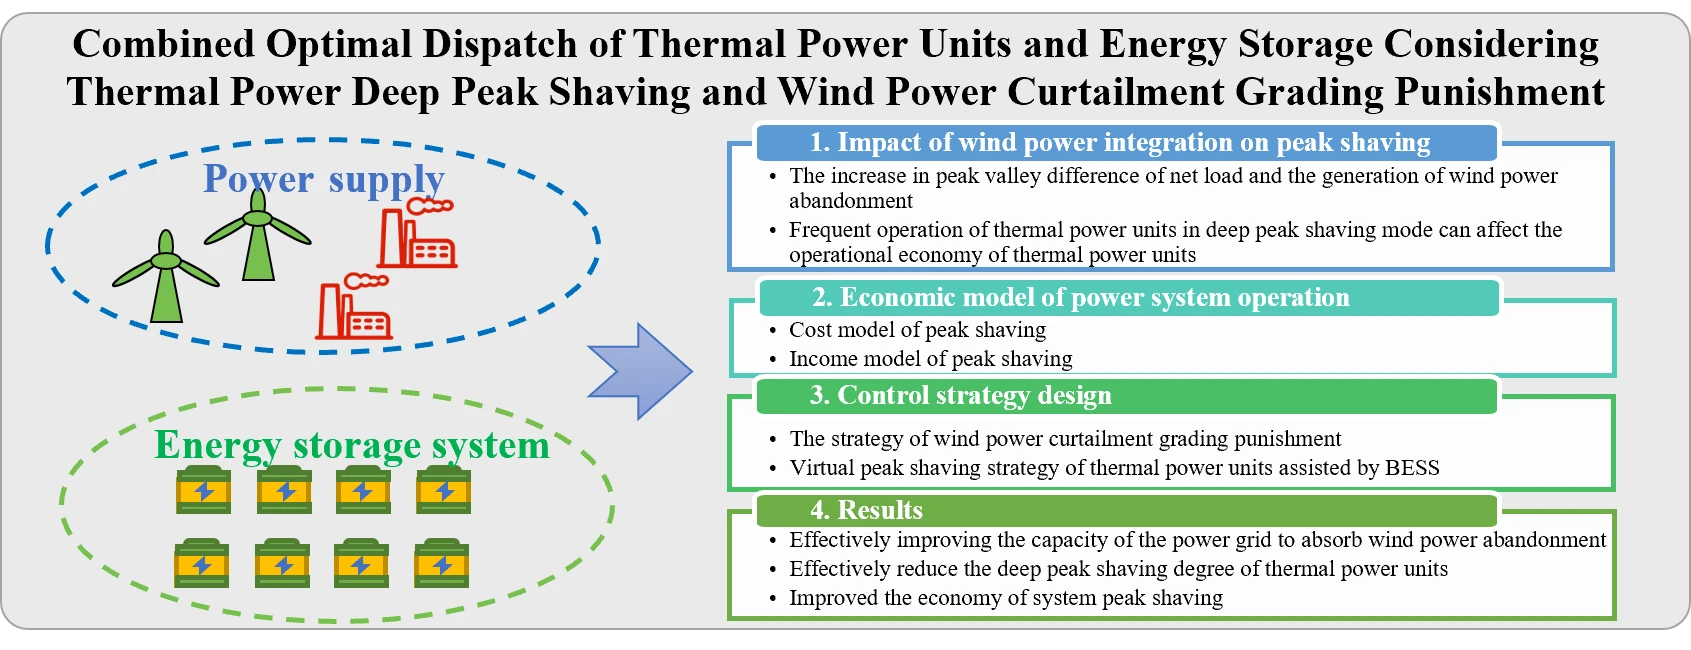 Combined Optimal Dispatch of Thermal Power Generators and Energy Storage Considering Thermal Power Deep Peak Clipping and Wind Energy Emission Grading Punishment